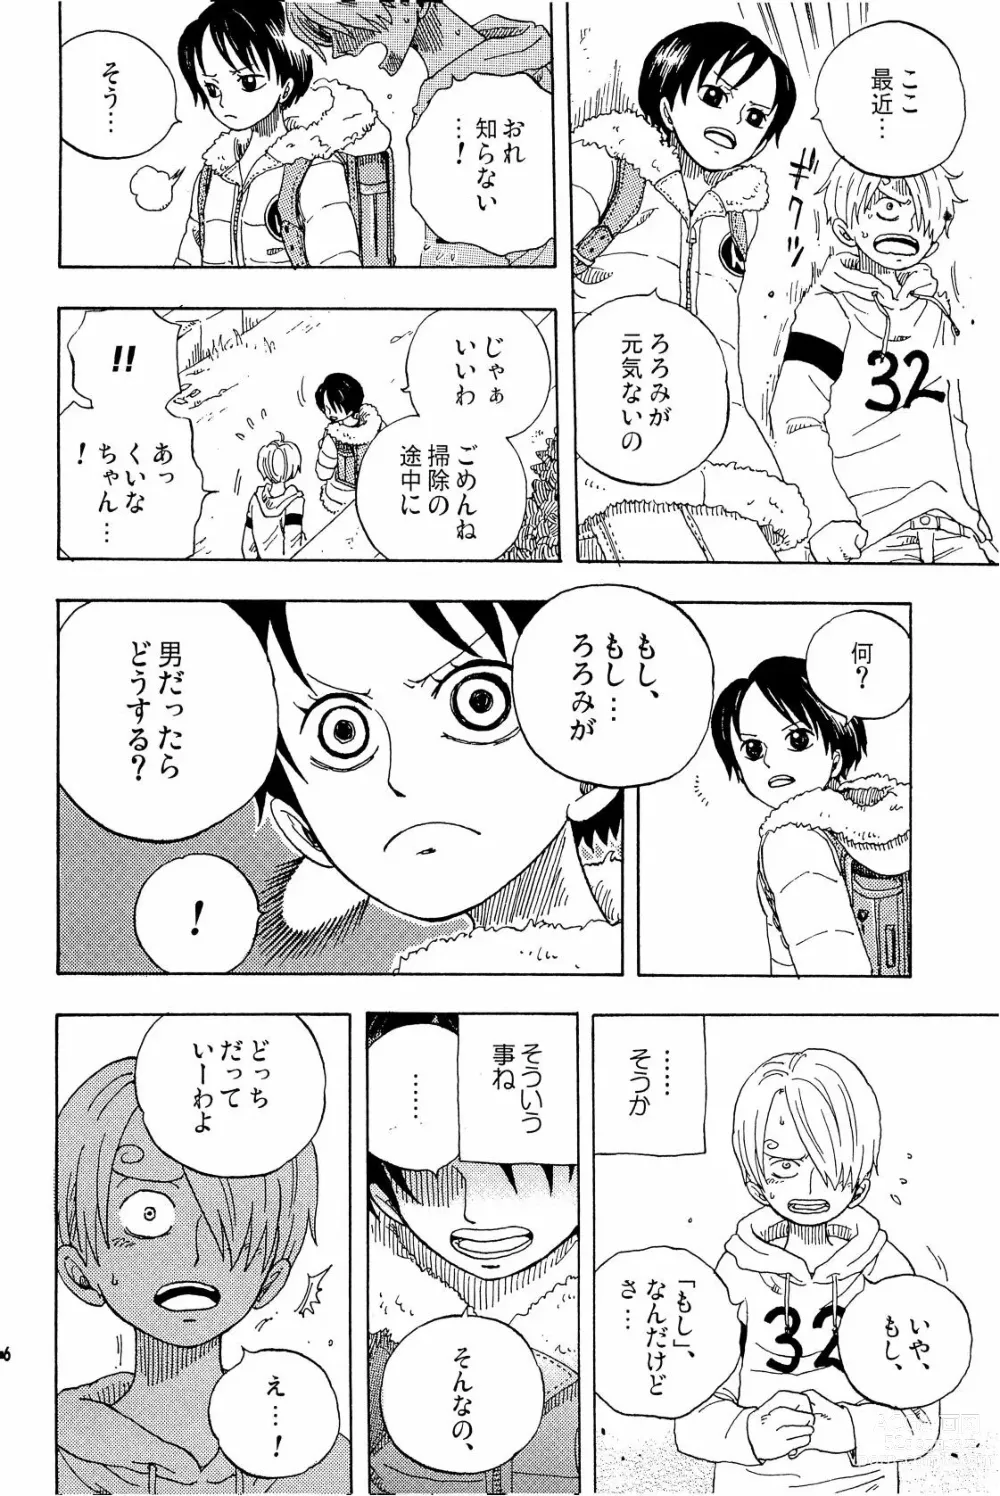 Page 65 of doujinshi your song